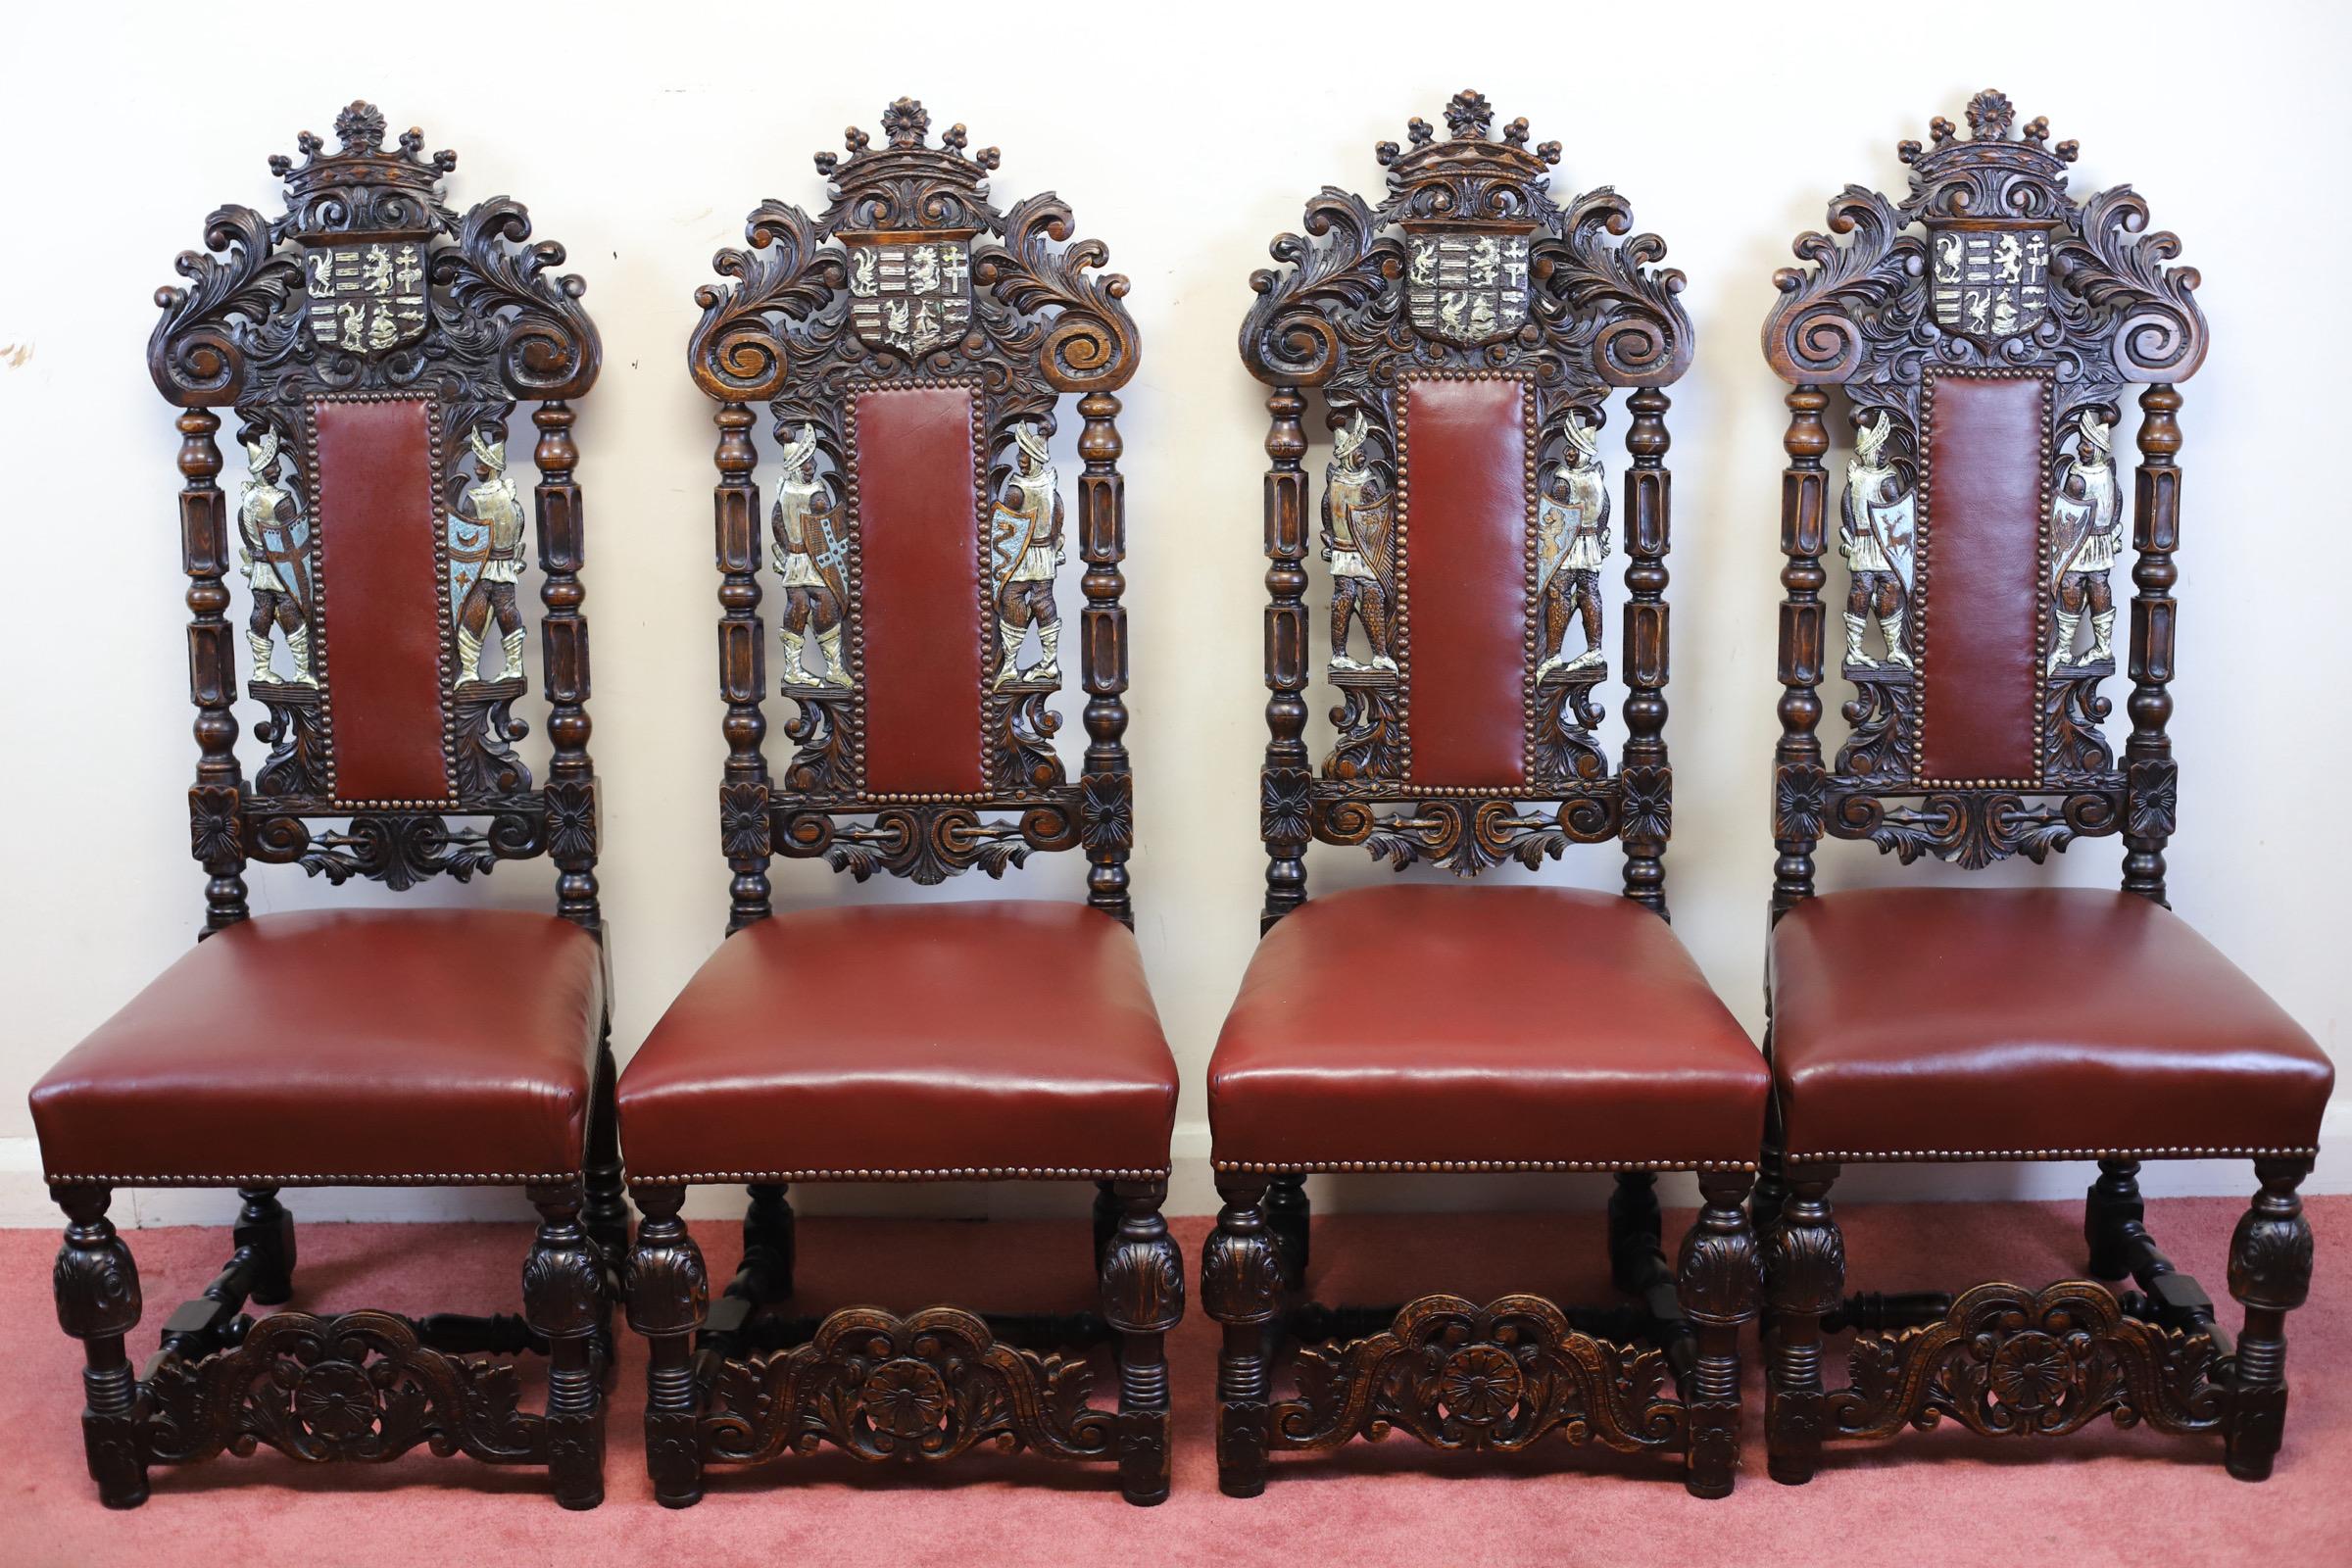 WE DELIGHT TO OFFER FOR SALE THIS STUNNING SET OF 4 OAK FRAMED DINING CHAIRS WITH HEAVILY CARVED DETAIL BEARING CREST AND TWO KNIGHTS, LEATHER UPHOLSTERED SEATS AND STRETCHER SUPPORTS. CIRCA 1880 .
Don't hesitate to contact me if you have any